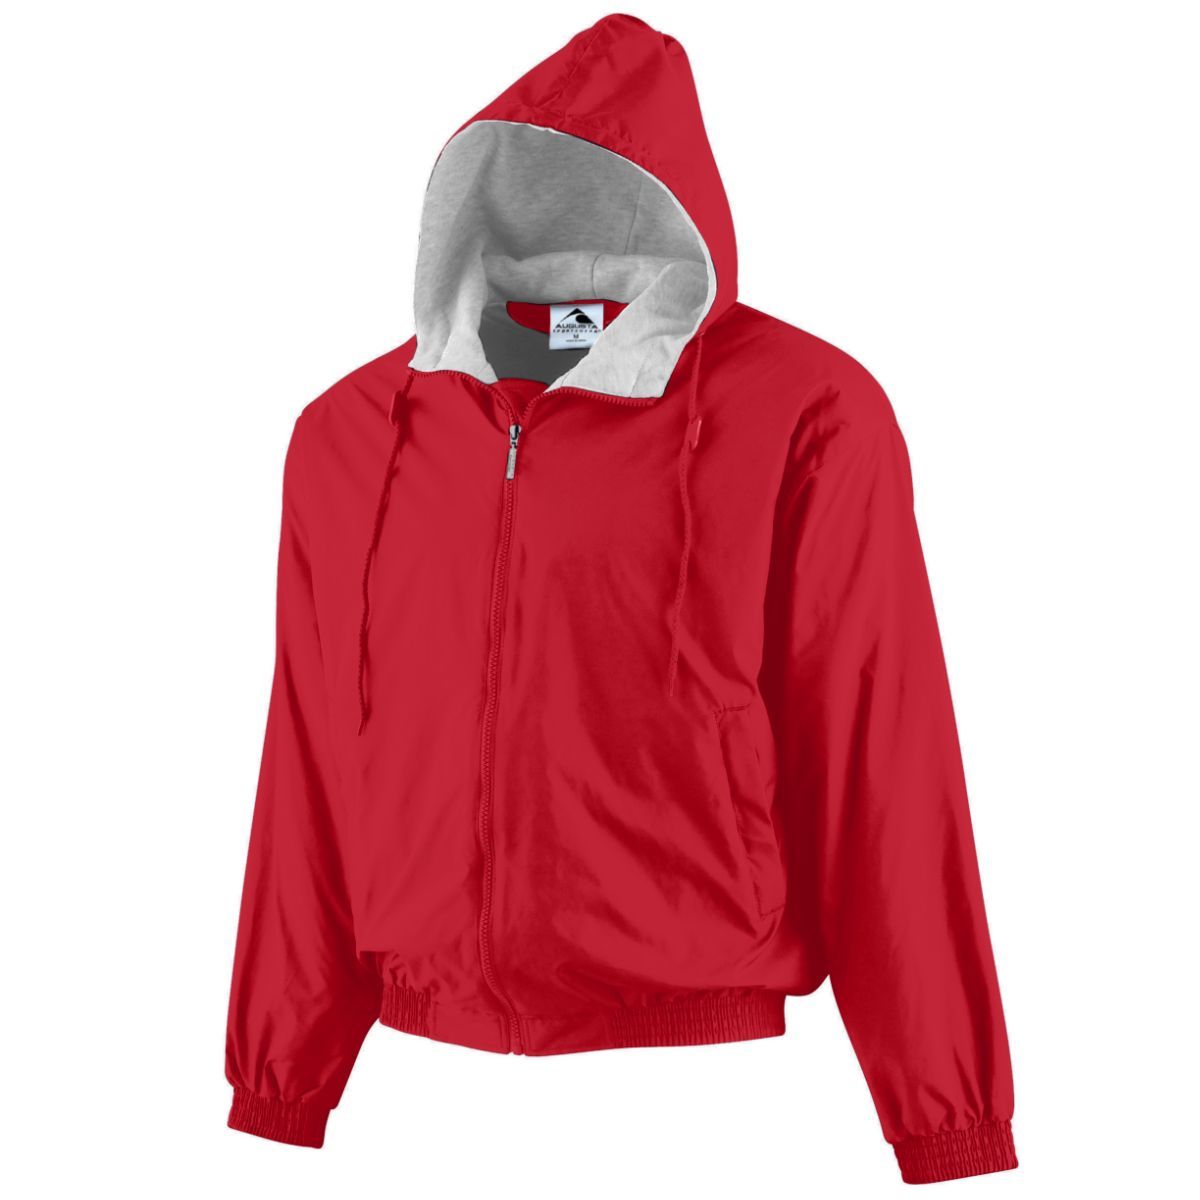 Augusta Sportswear Youth Hooded Taffeta Jacket/Fleece Lined in Red  -Part of the Youth, Youth-Jacket, Augusta-Products, Outerwear product lines at KanaleyCreations.com